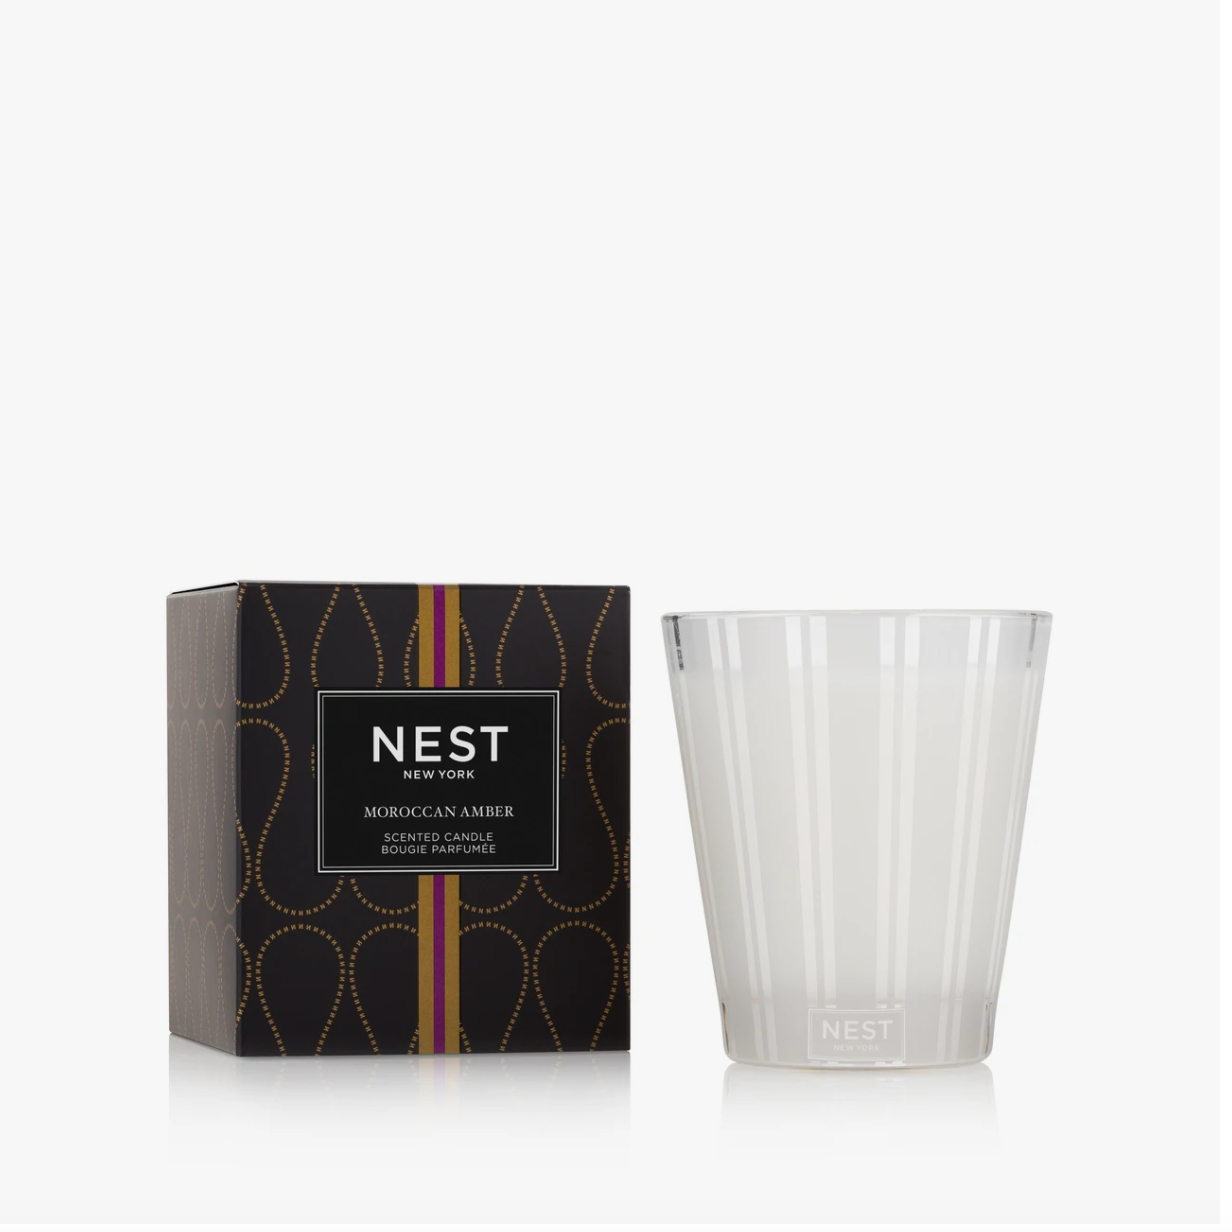 Nest Classic Candle 8.1oz Candles in Moroccan Amber at Wrapsody